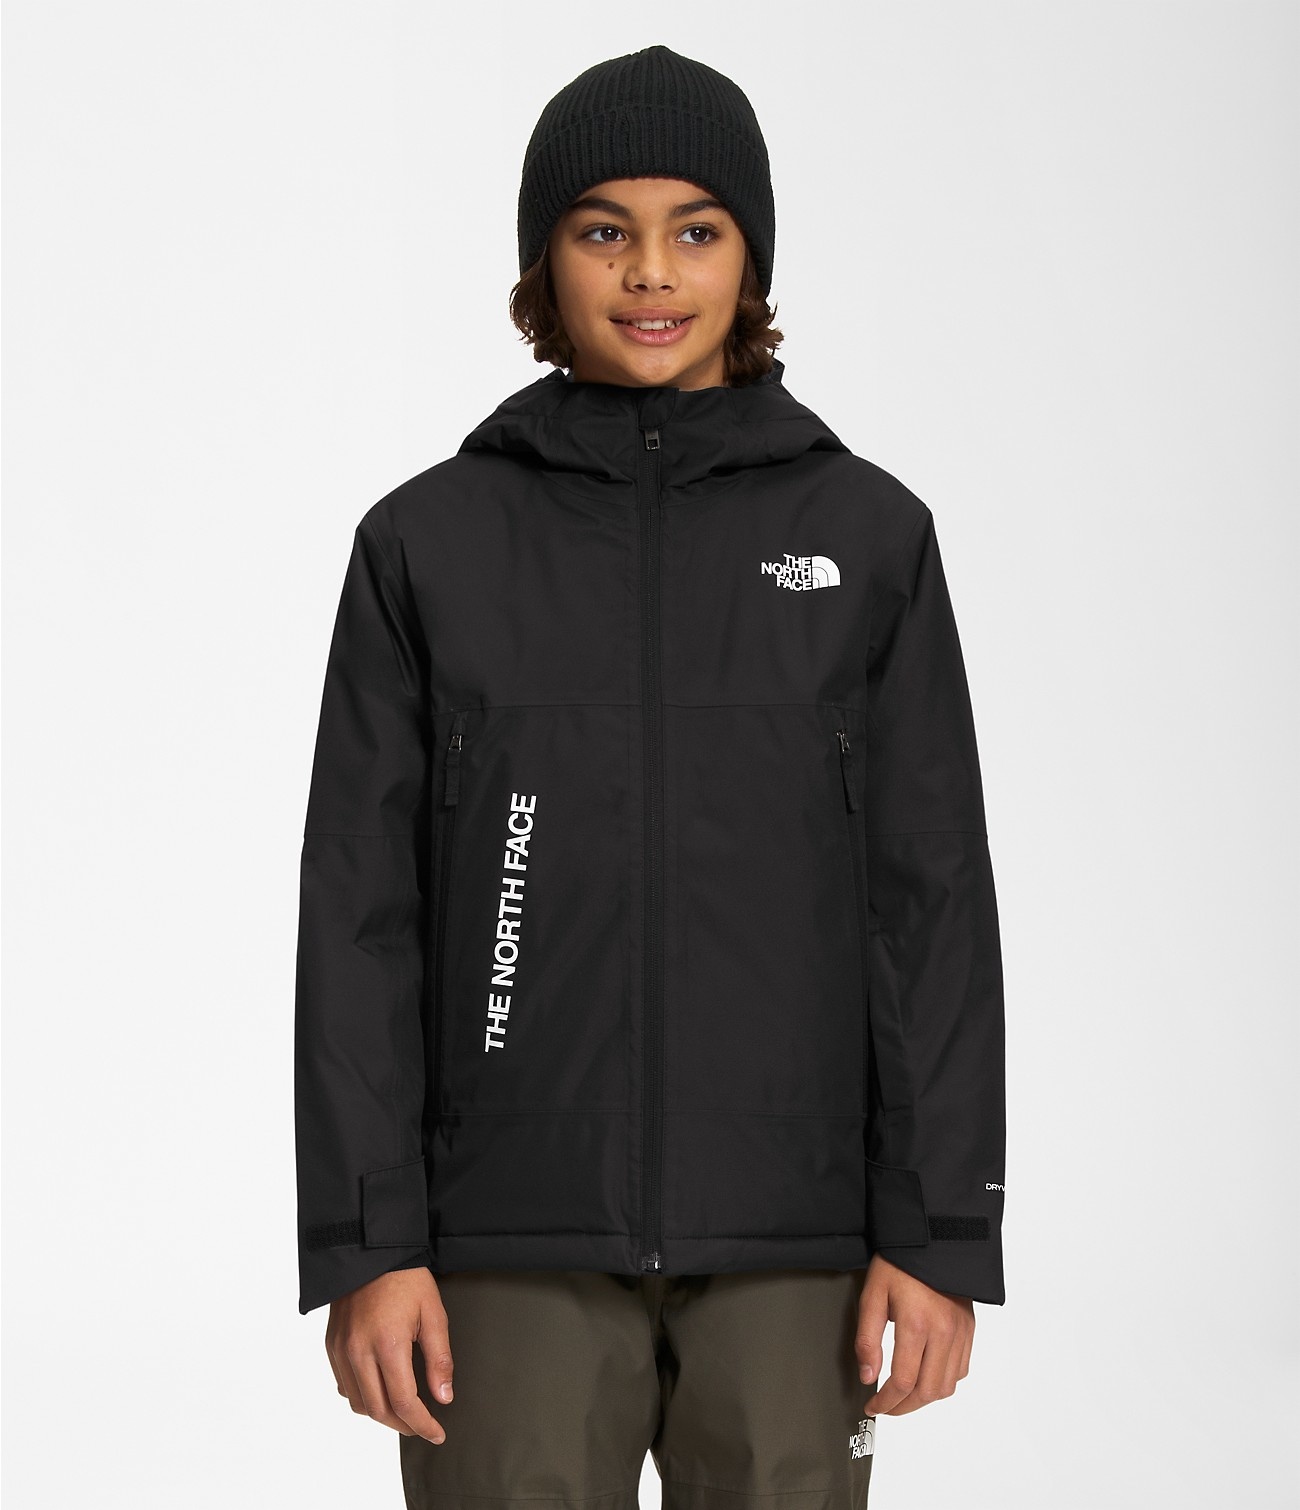 THE NORTH FACE BOYS FREEDOM INSULATED SNOW JACKET BLACK    ONE